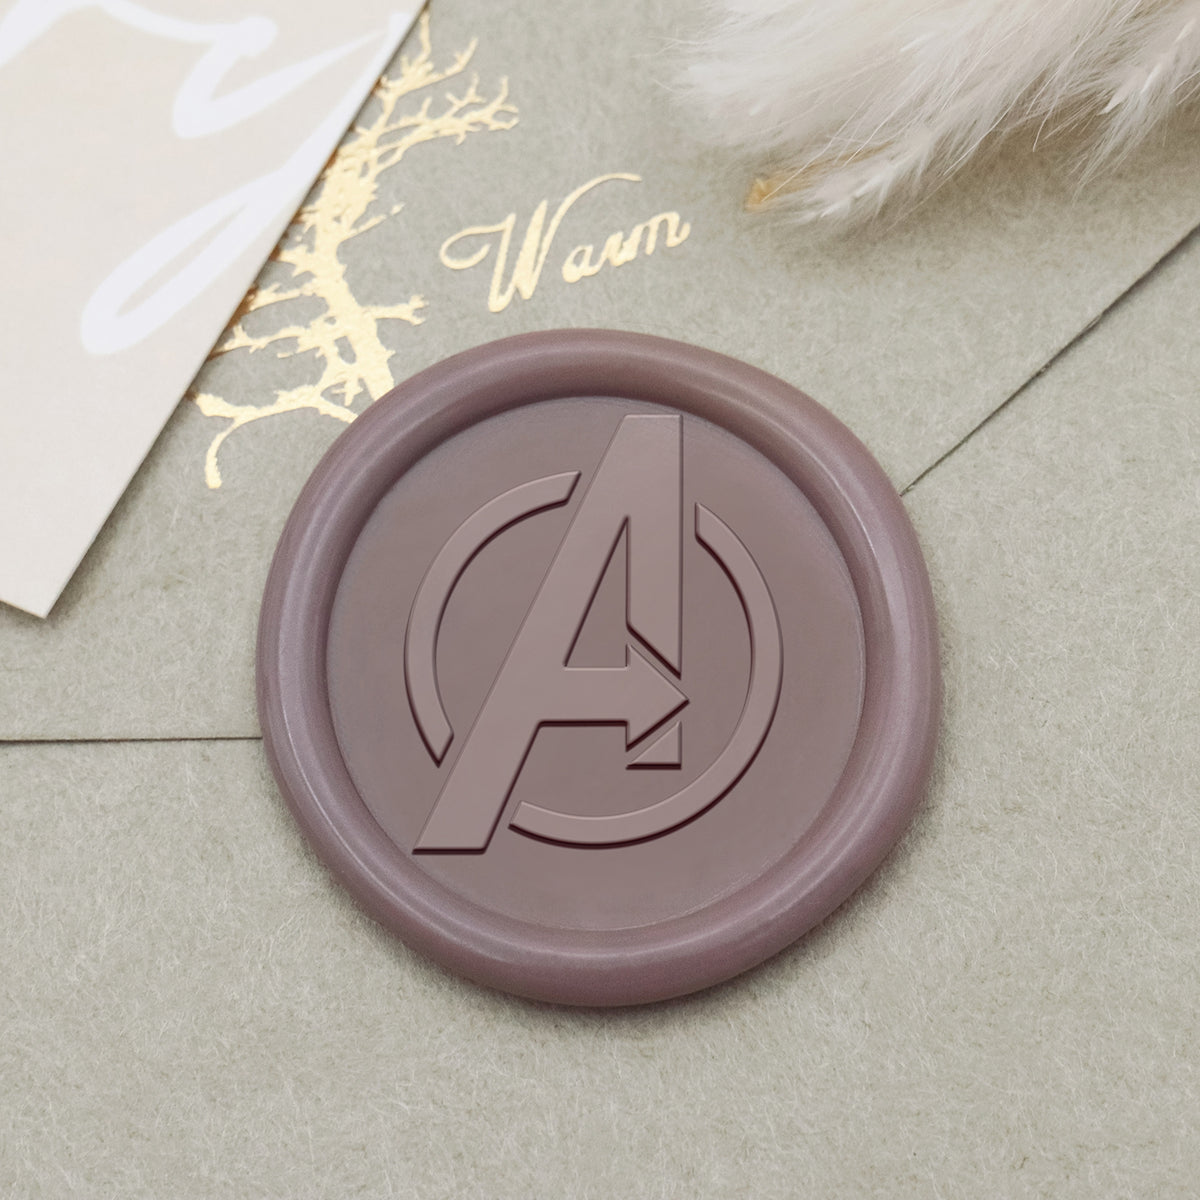 Stamprints Avengers Wax Seal Stamp 1